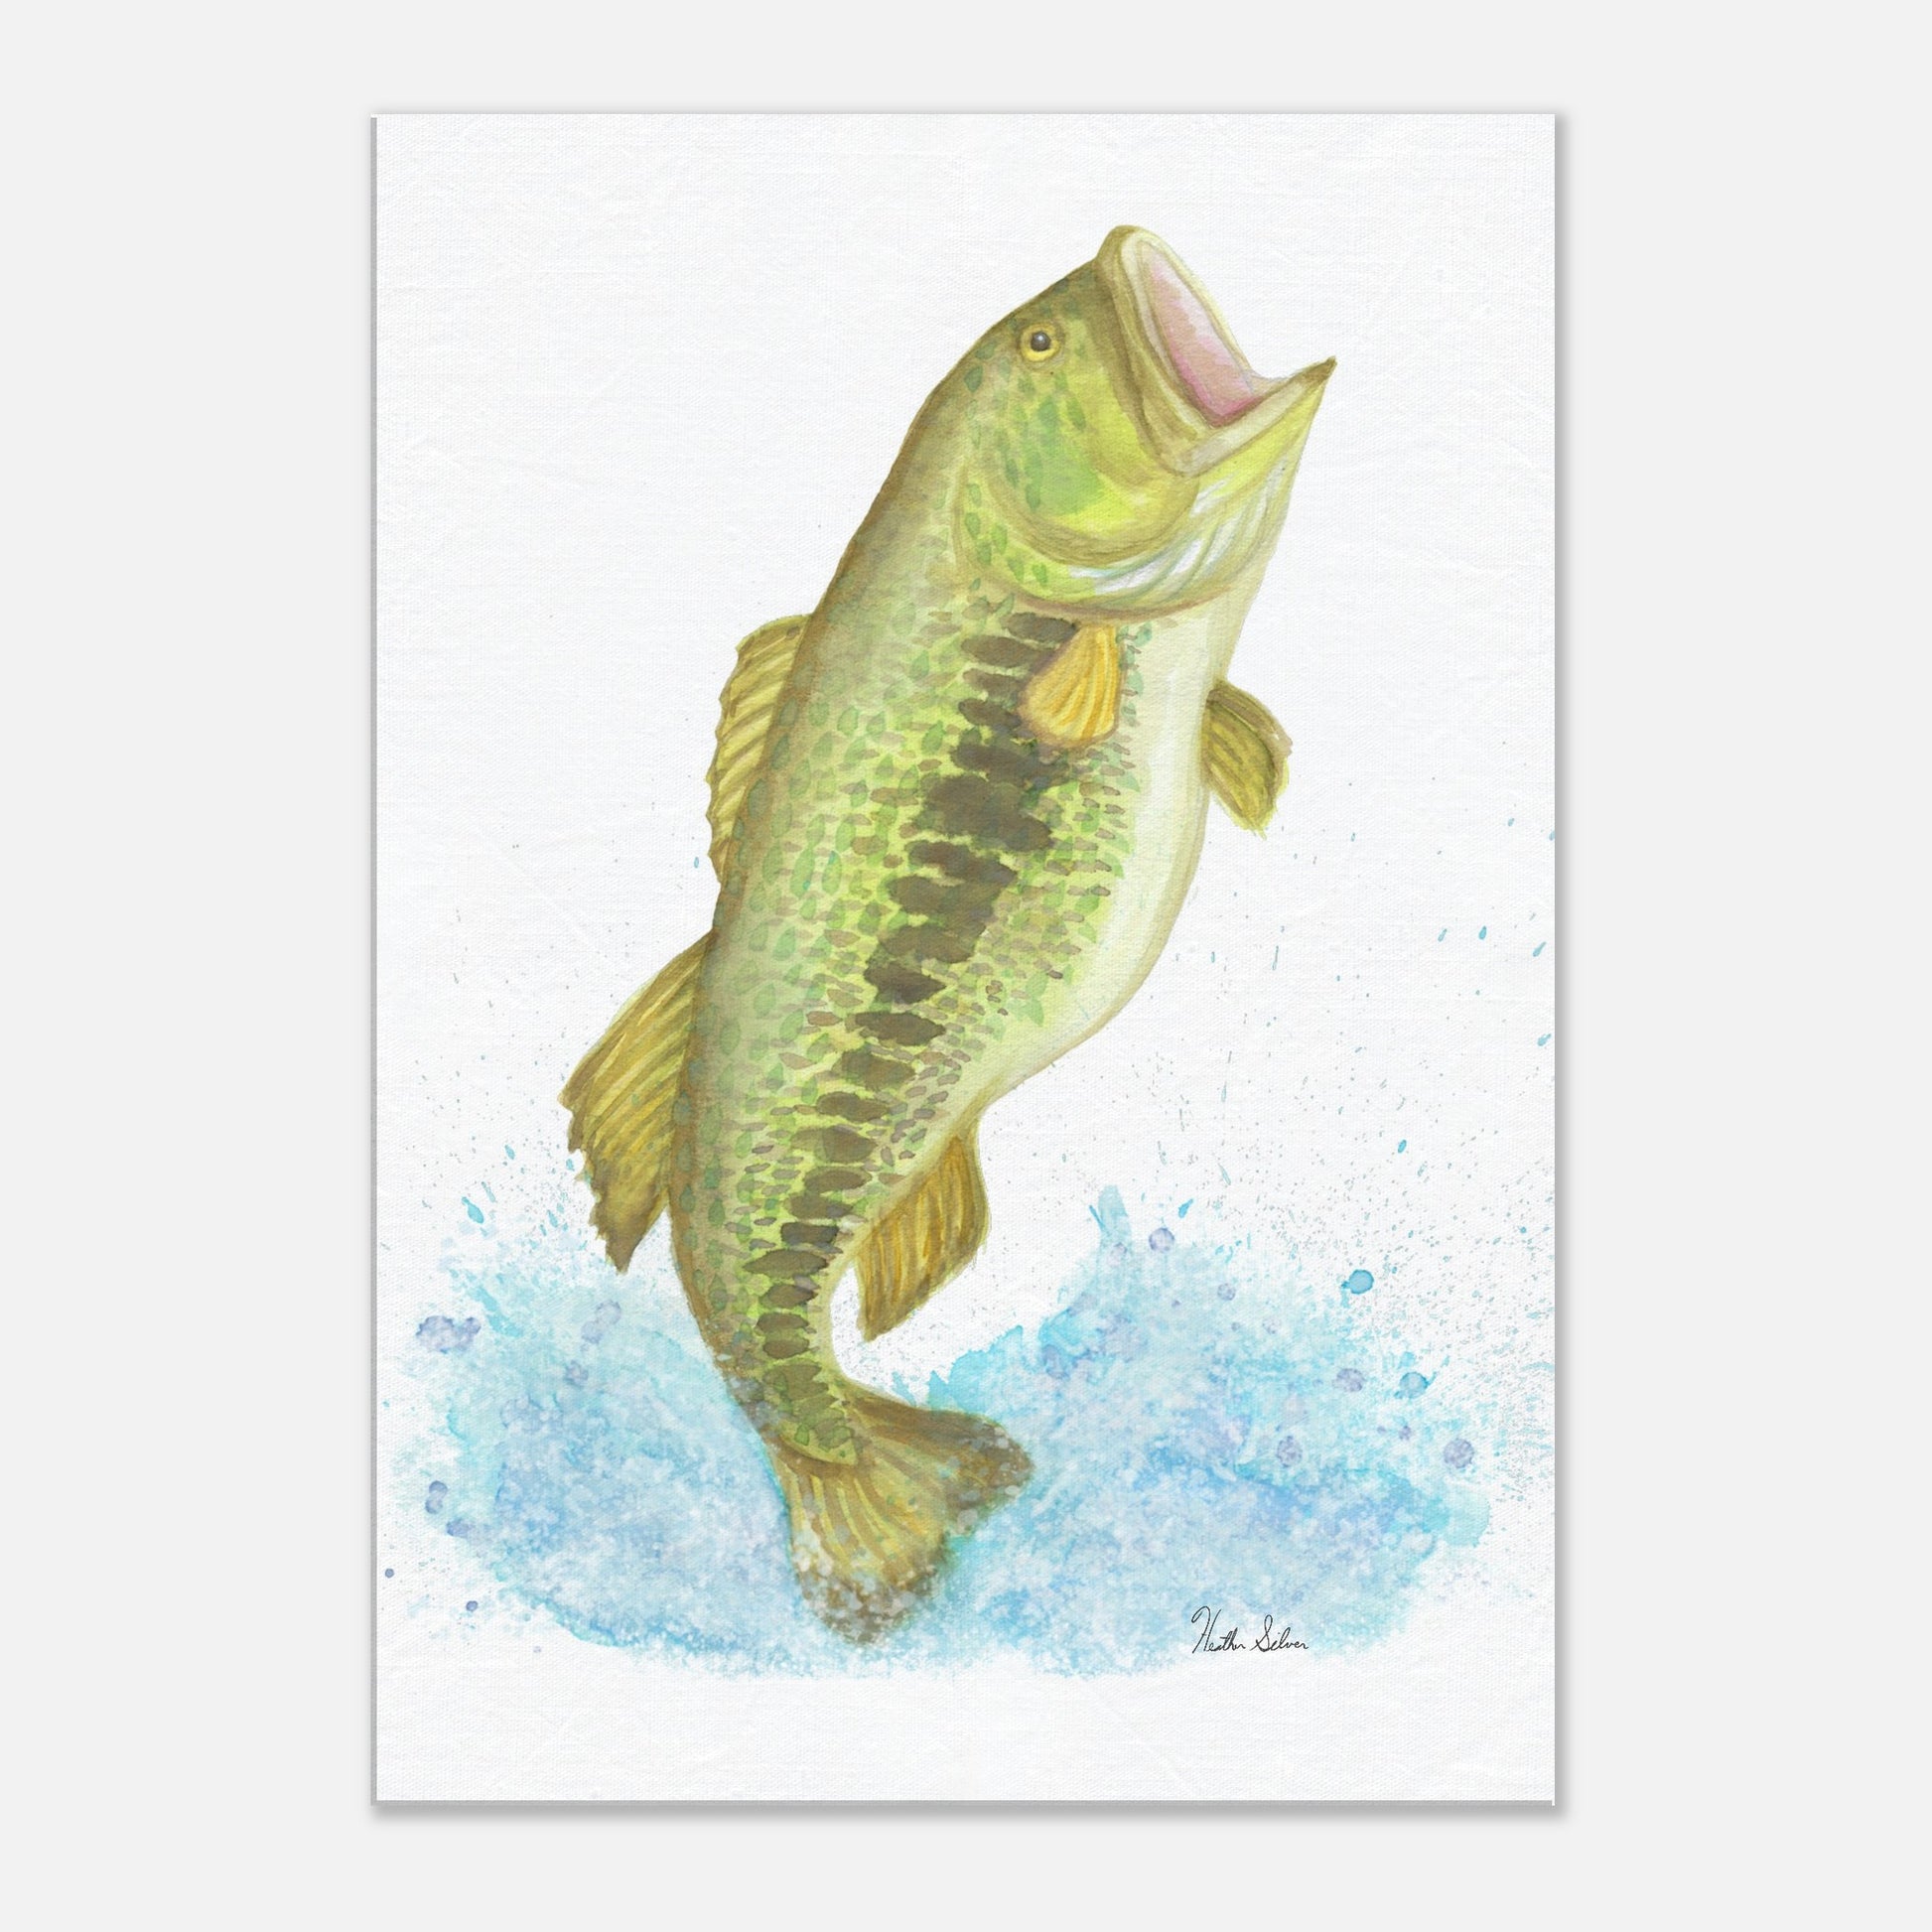 28 by 40 inch slim canvas wall art print featuring a watercolor painting of a largemouth bass leaping from the water. Hanging hardware included.